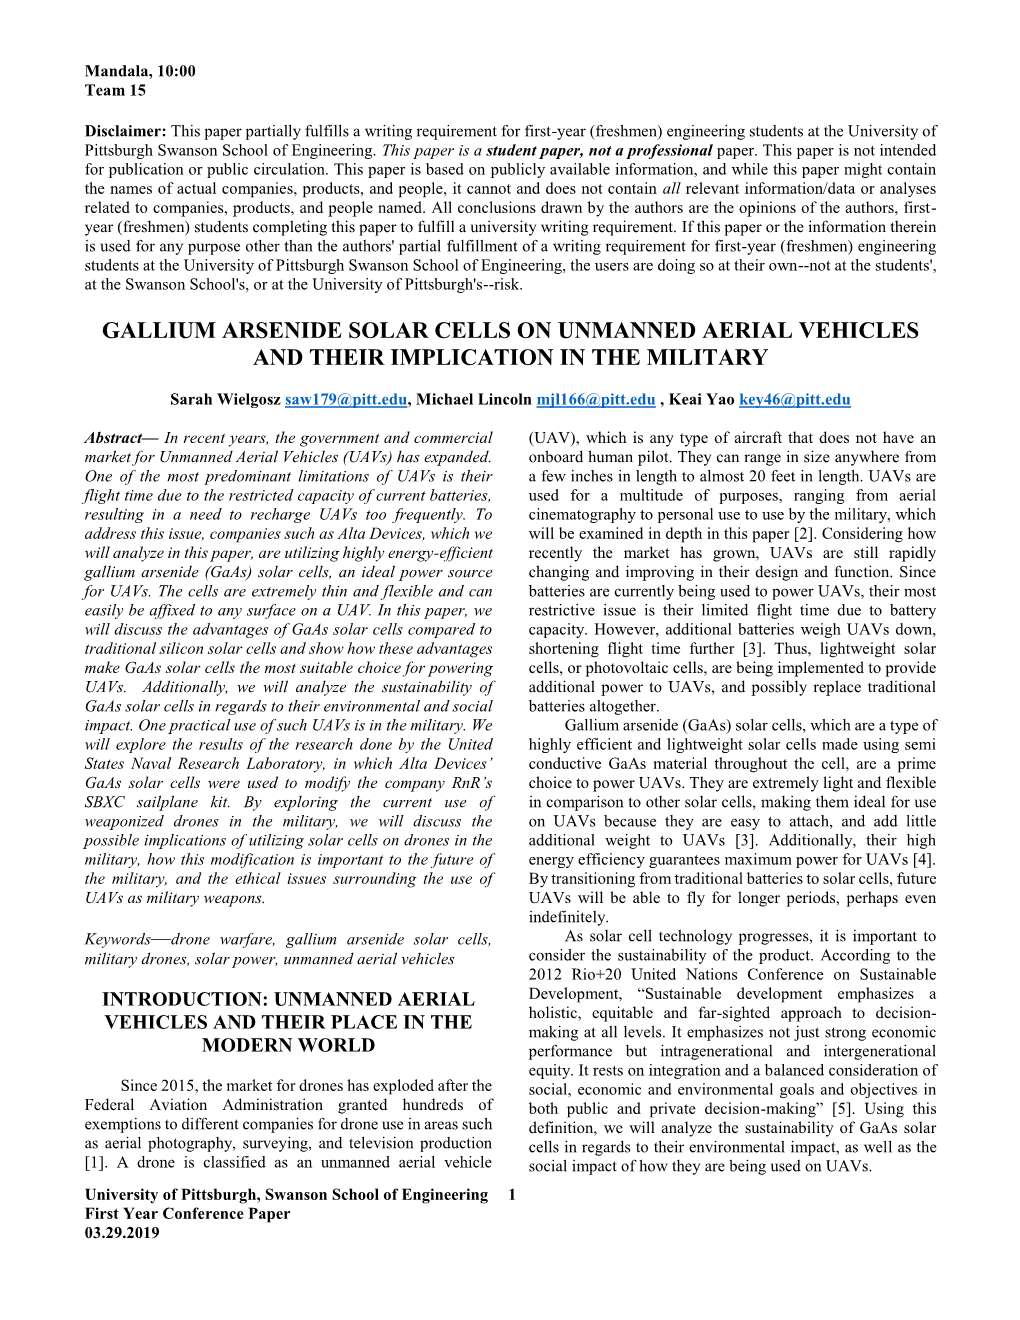 Gallium Arsenide Solar Cells on Unmanned Aerial Vehicles and Their Implication in the Military